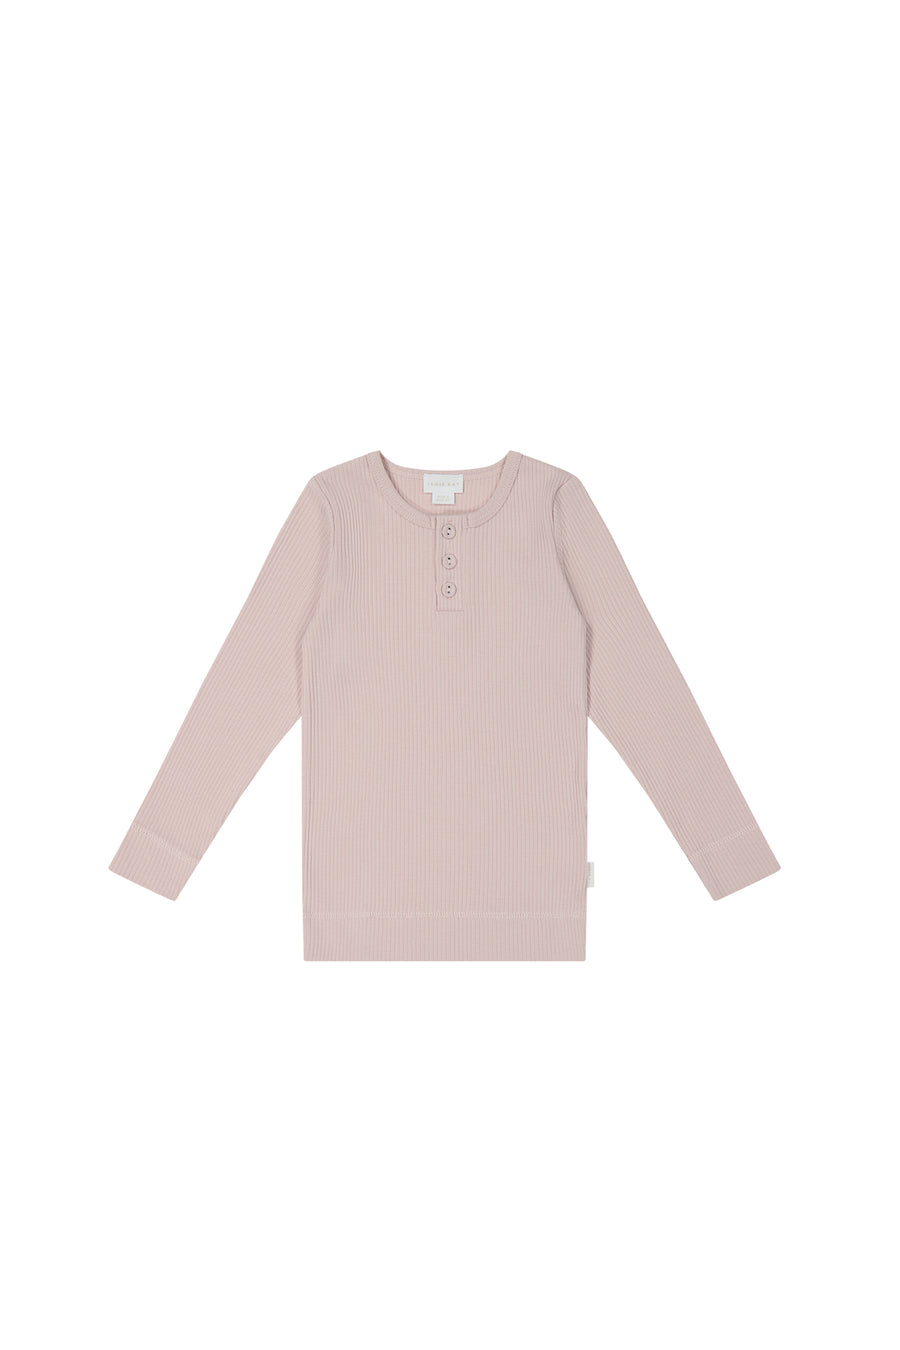 Organic Cotton Modal Long Sleeve Henley - Rosie Childrens Top from Jamie Kay NZ